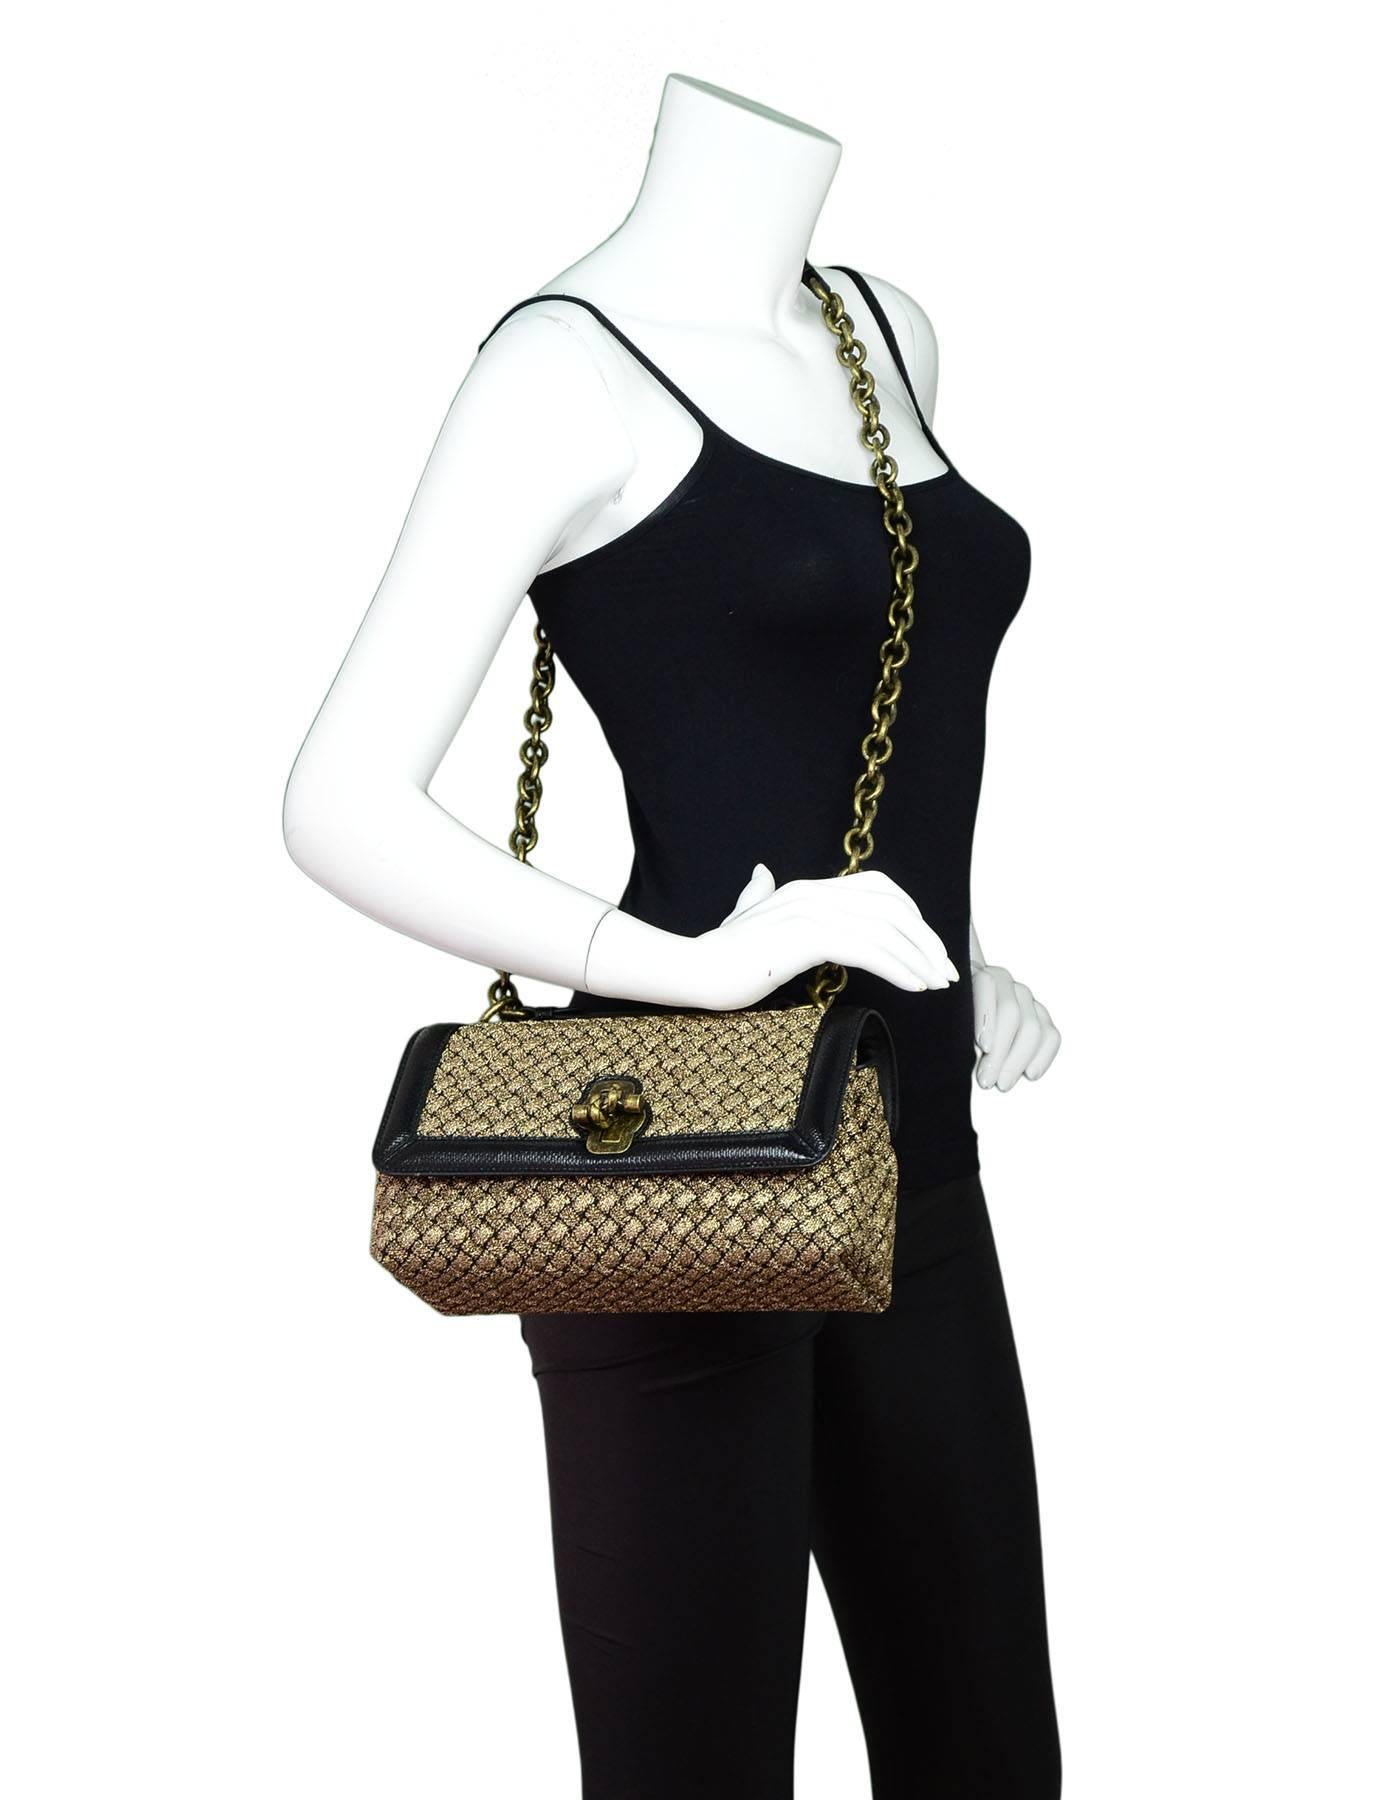 Bottega Veneta Black & Gold Olimpia Woven Knot Bag

Made In: Italy
Color: Black, gold
Hardware: Brass
Materials: Woven metallic wool, black Karung snakeskin trim
Lining: Taupe suede
Closure/Opening: Flap top with front twist-lock
Exterior Pockets: